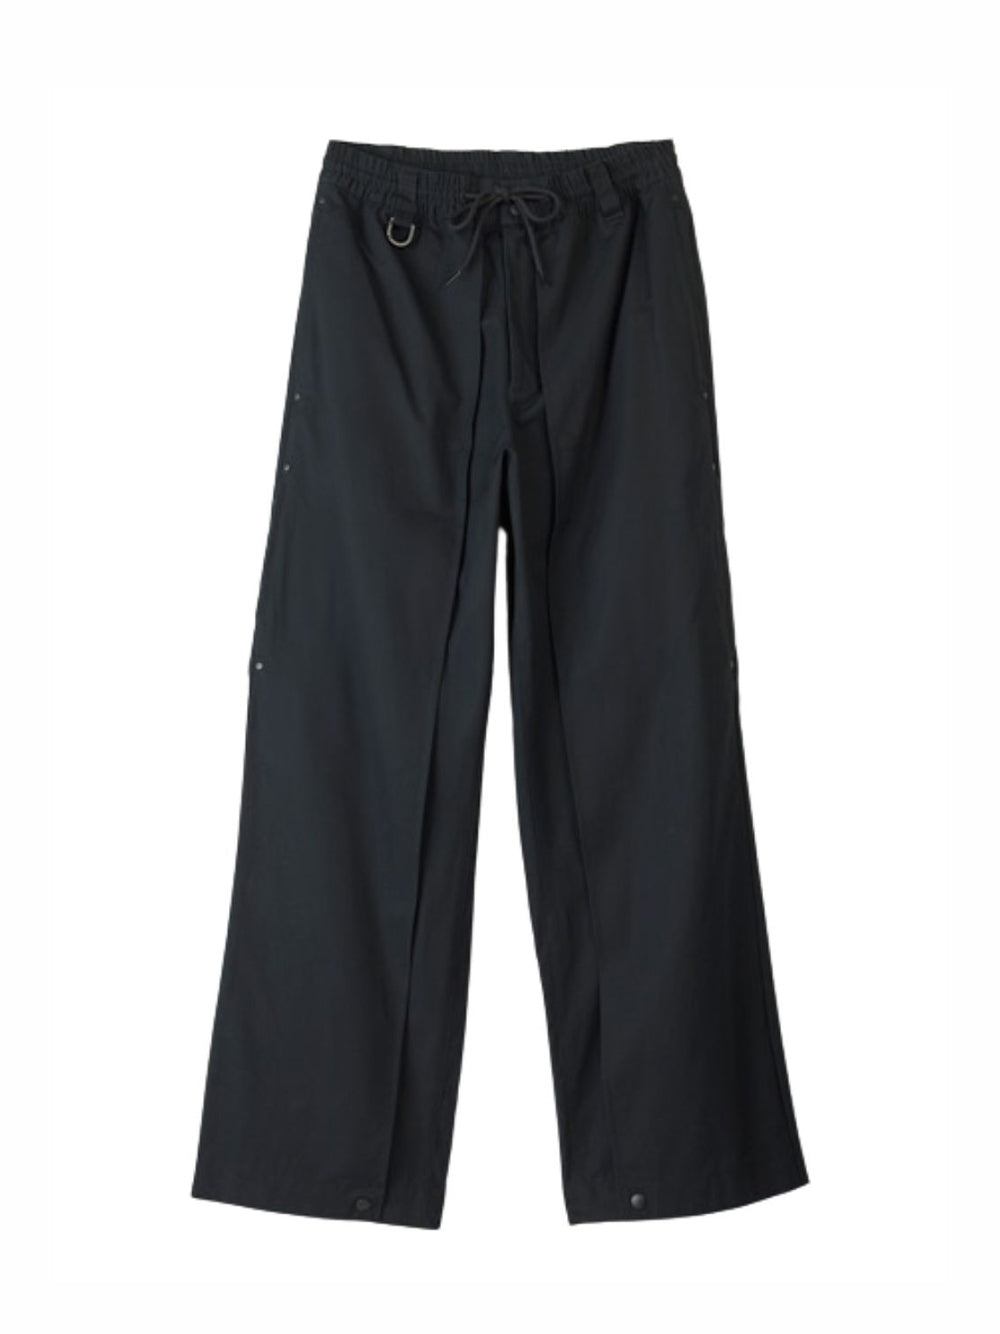 Workwear Pants With Snap Buttons (Black)